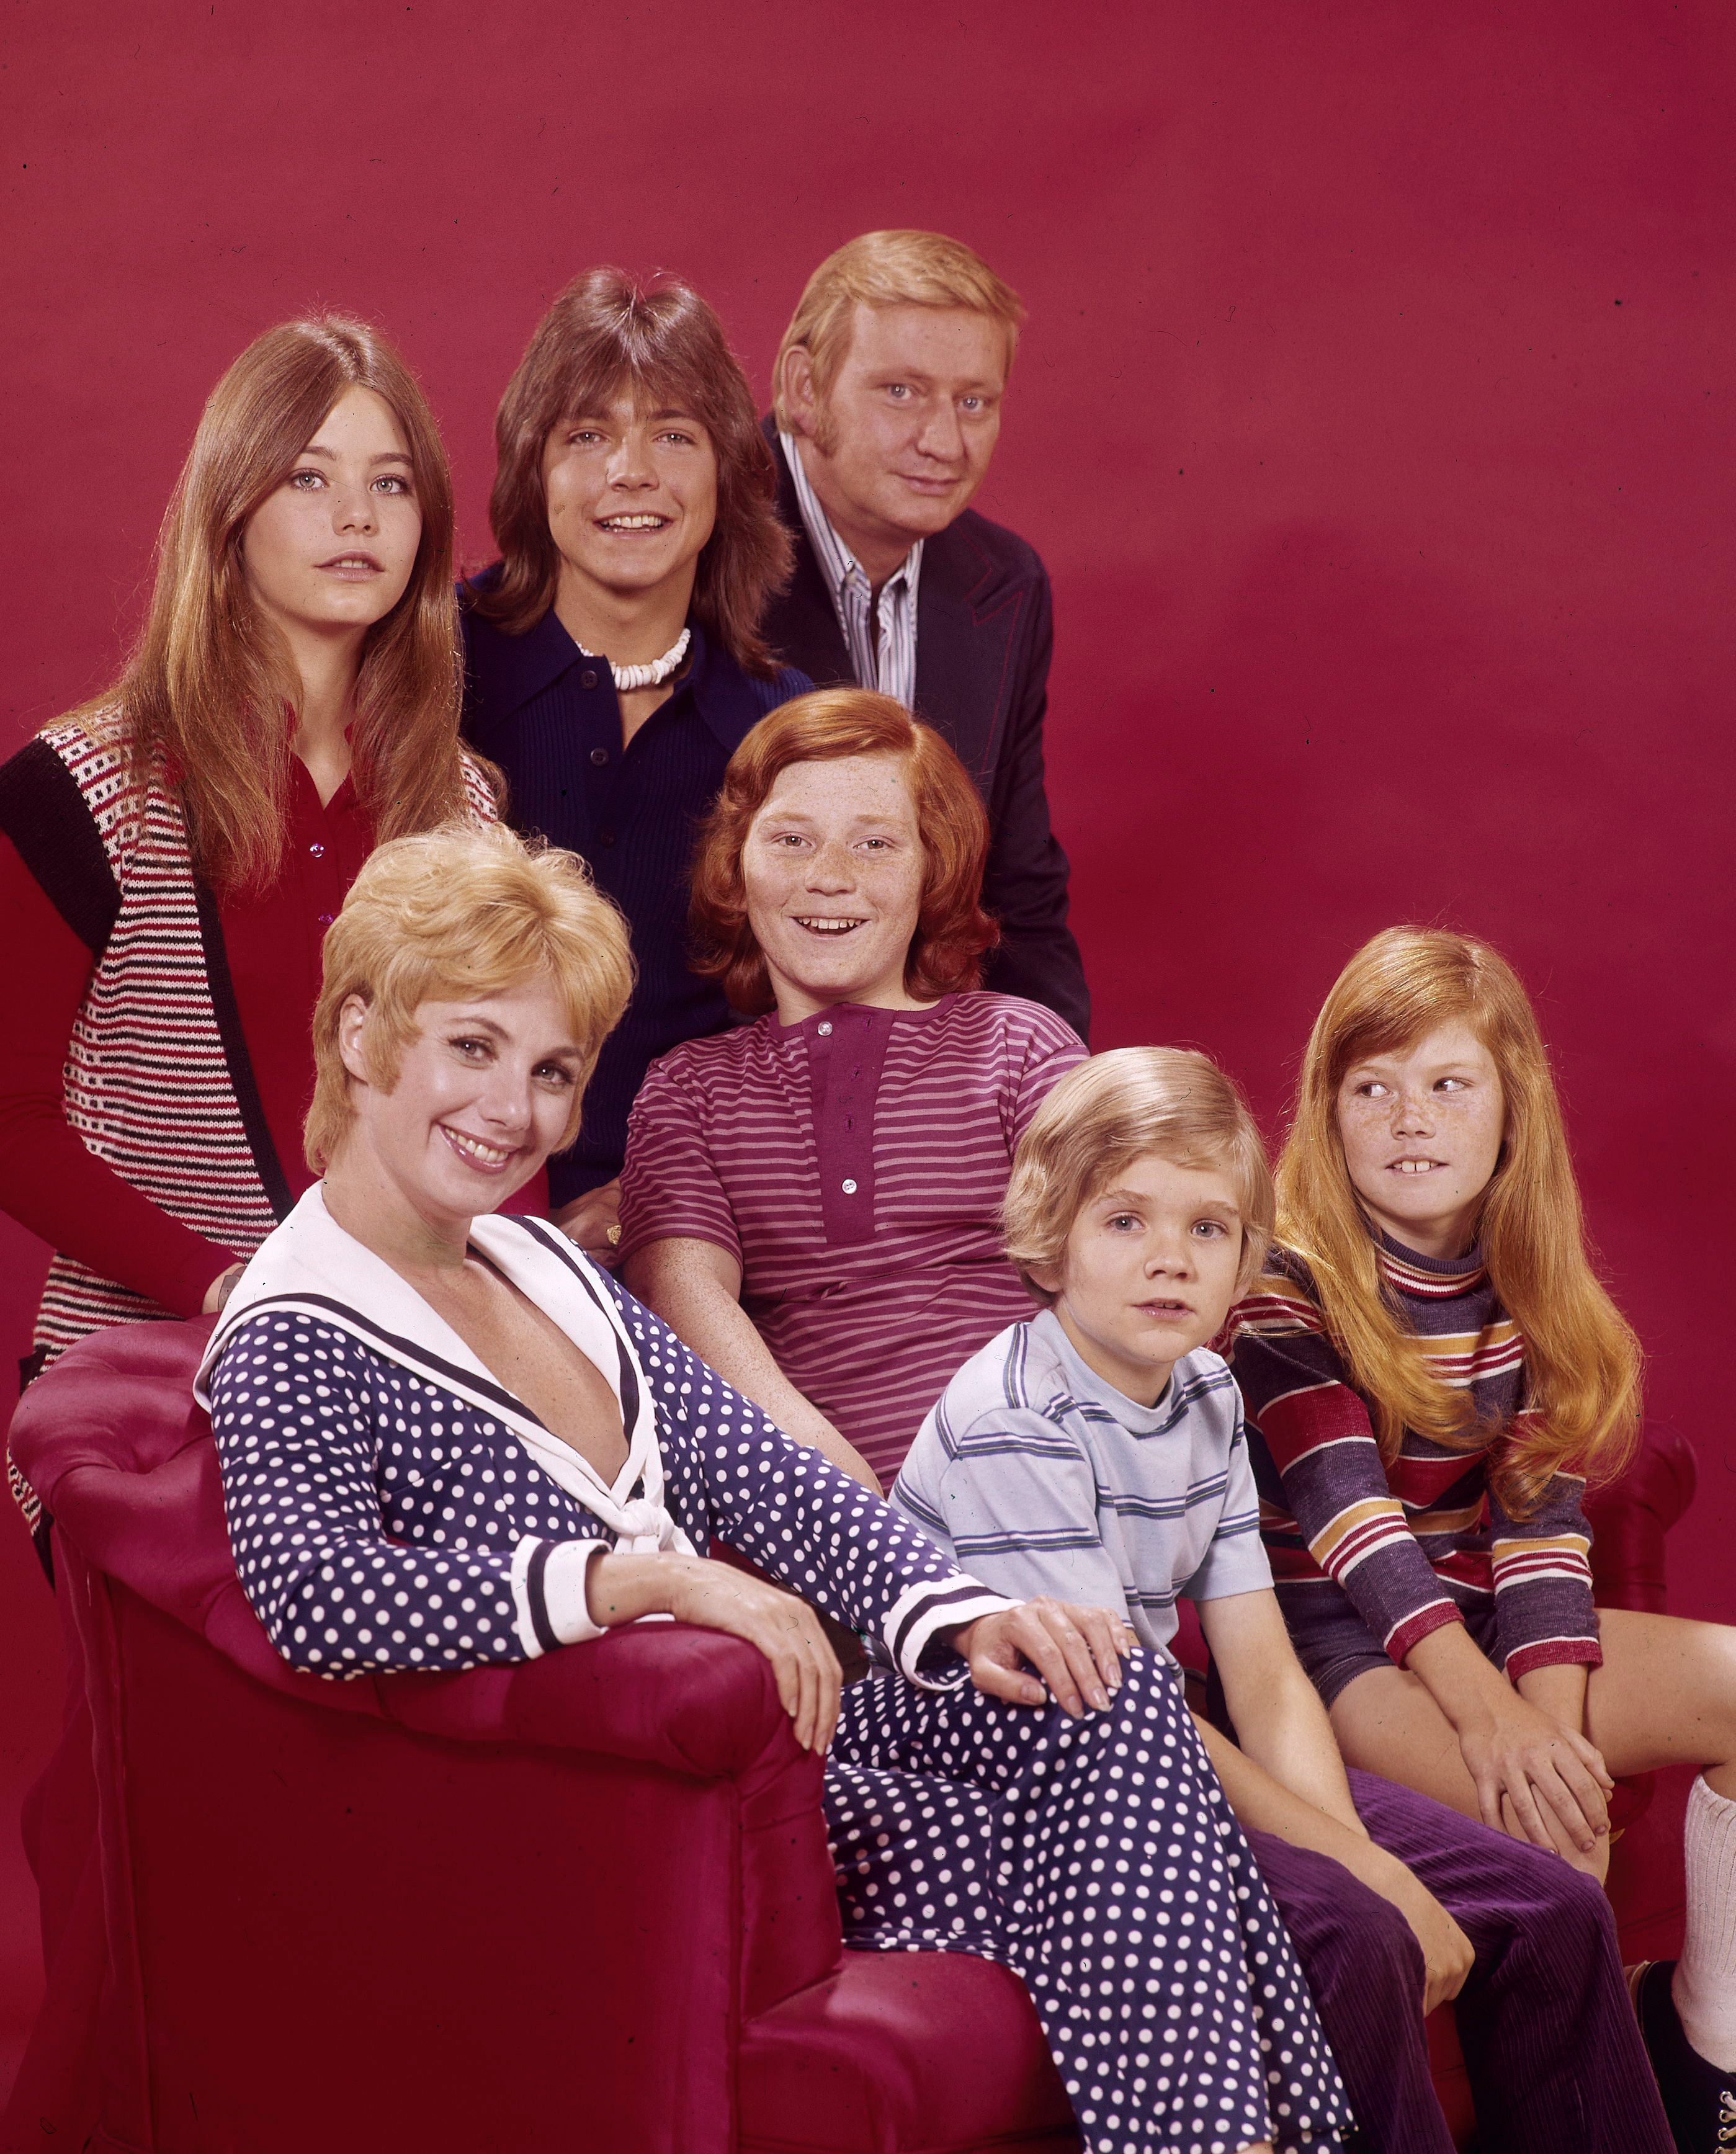 From (L-R) Susan Dey, Shirley Jones, David Cassidy, Danny Bonaduce, Dave Madden, Brian Forster, Suzanne Crough from "The Partridge Family" pictured on May 14, 2008 | Source: Getty Images